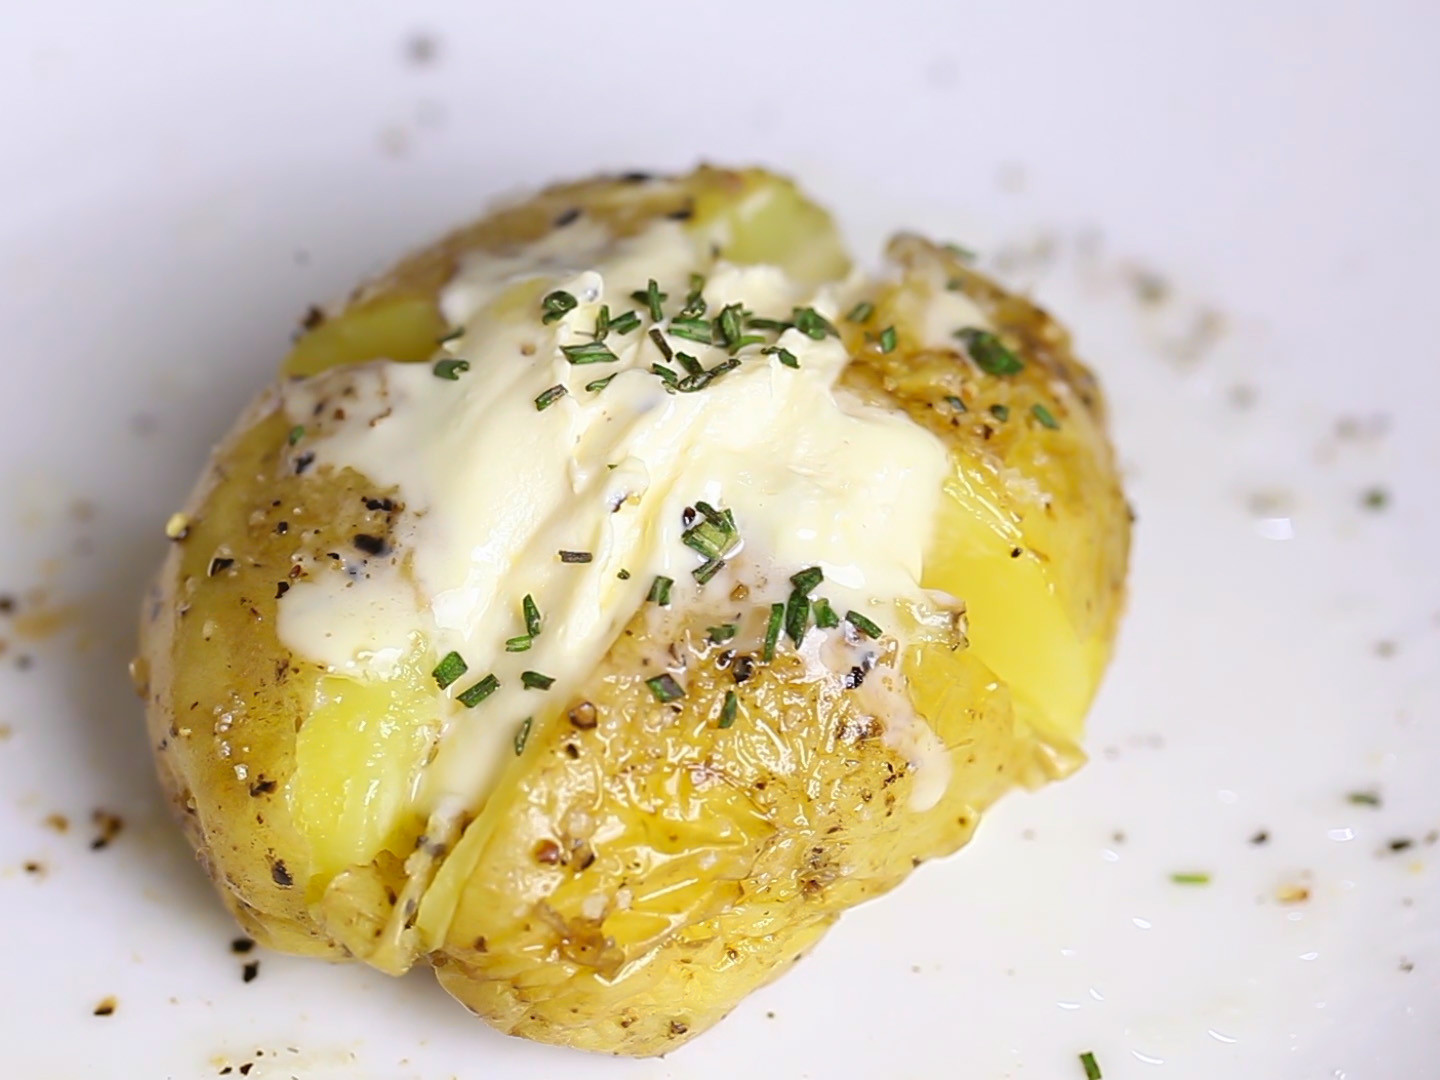 How To Make A Baked Potato In Microwave
 How to Bake a Potato in the Microwave 9 Steps with